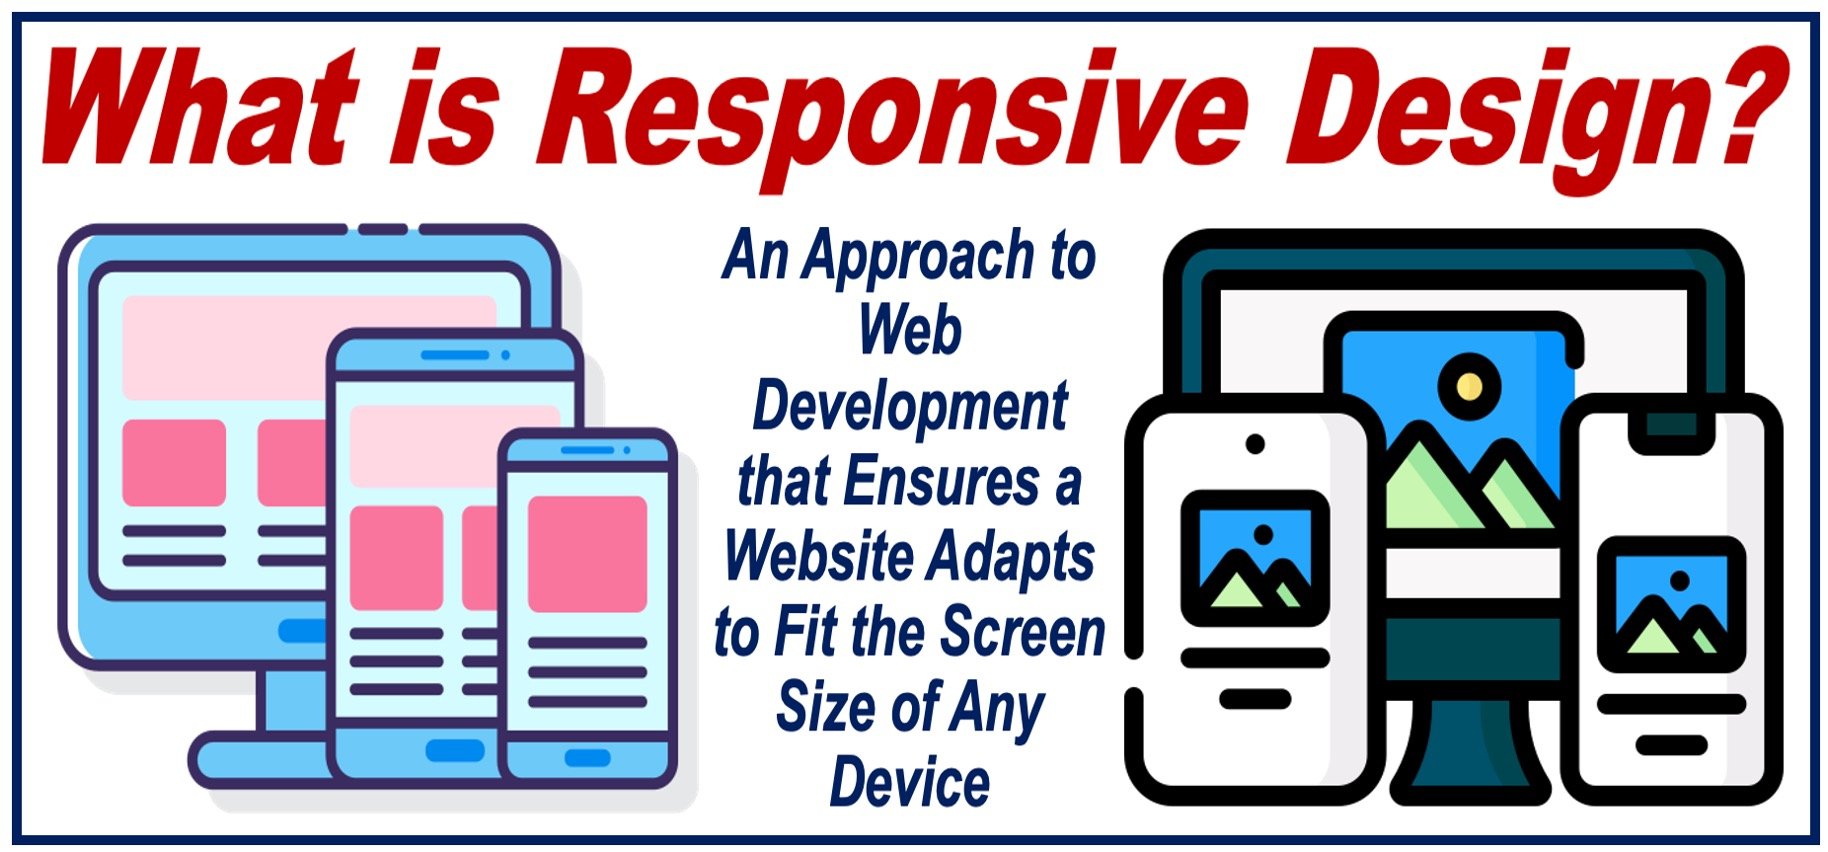 Image illustrating the features of Responsive Design - plus a definition